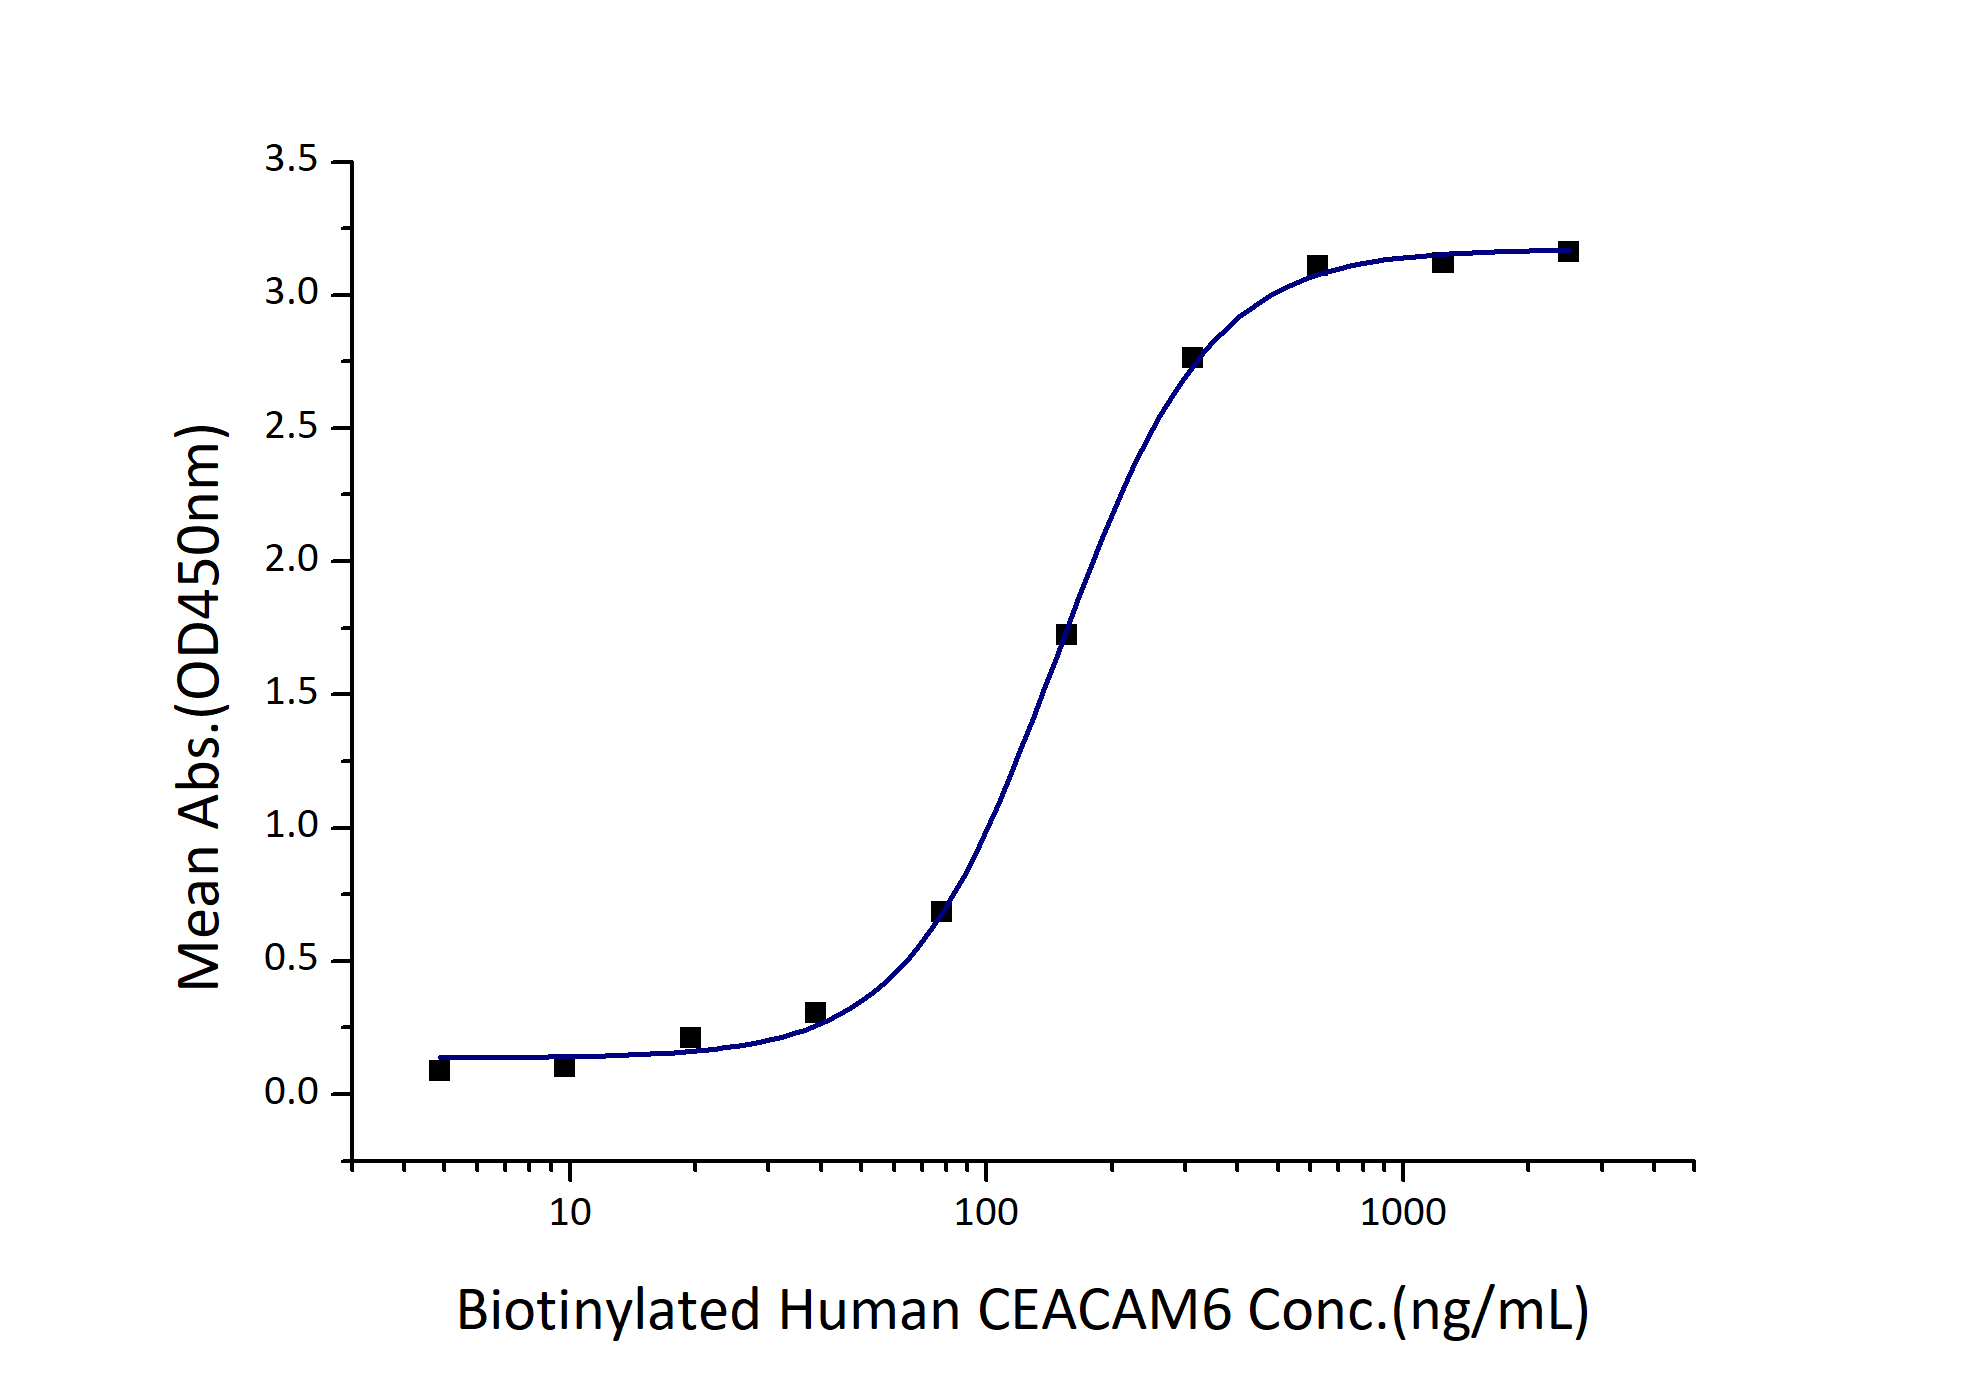 Immobilized Human CEACAM8 (Myc tag, His tag) at 2 μg/mL (100 μL/well) can bind Biotinylated Human CEACAM6 (Myc tag, His tag) with a linear range of 75-300 ng/mL.